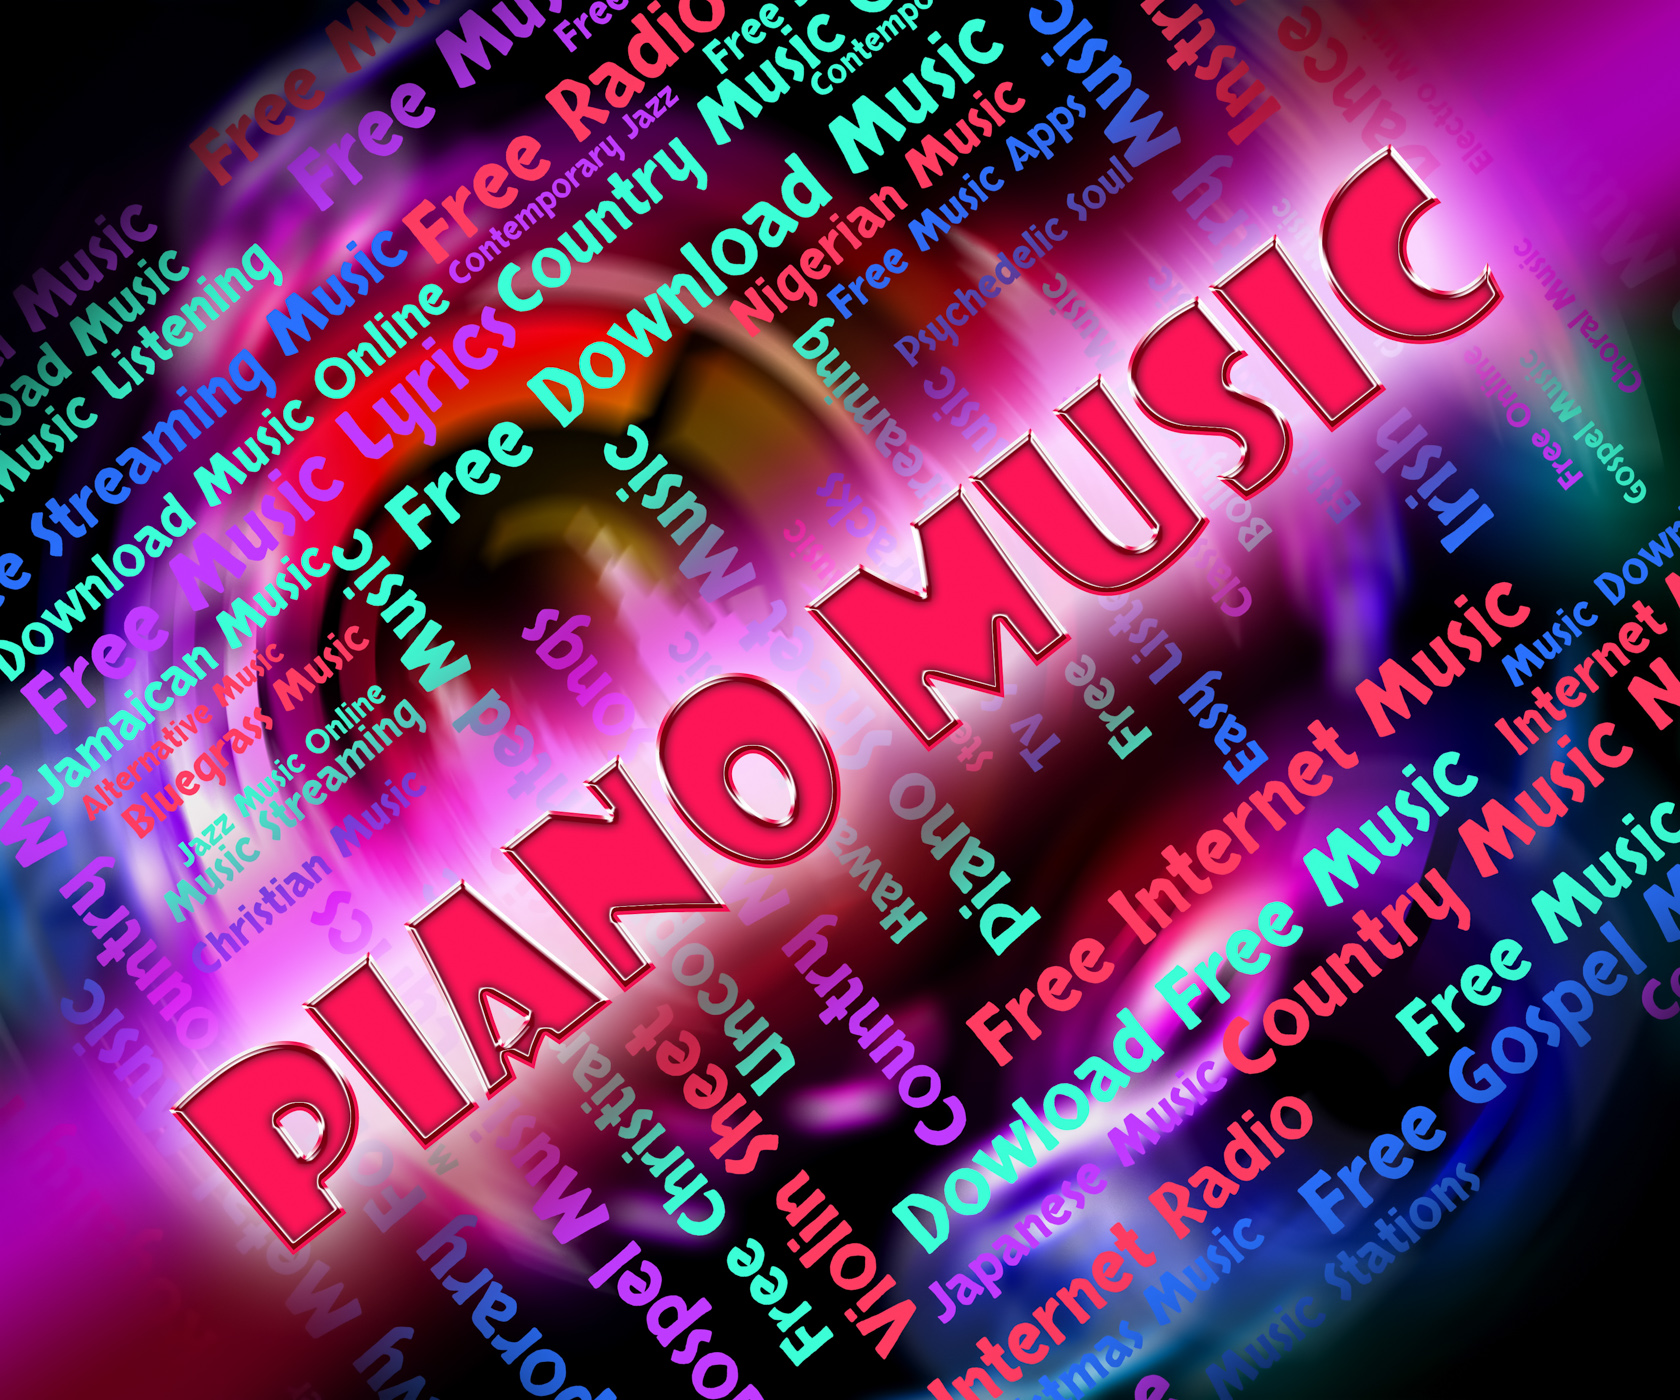 Piano music means sound track and keyboard photo